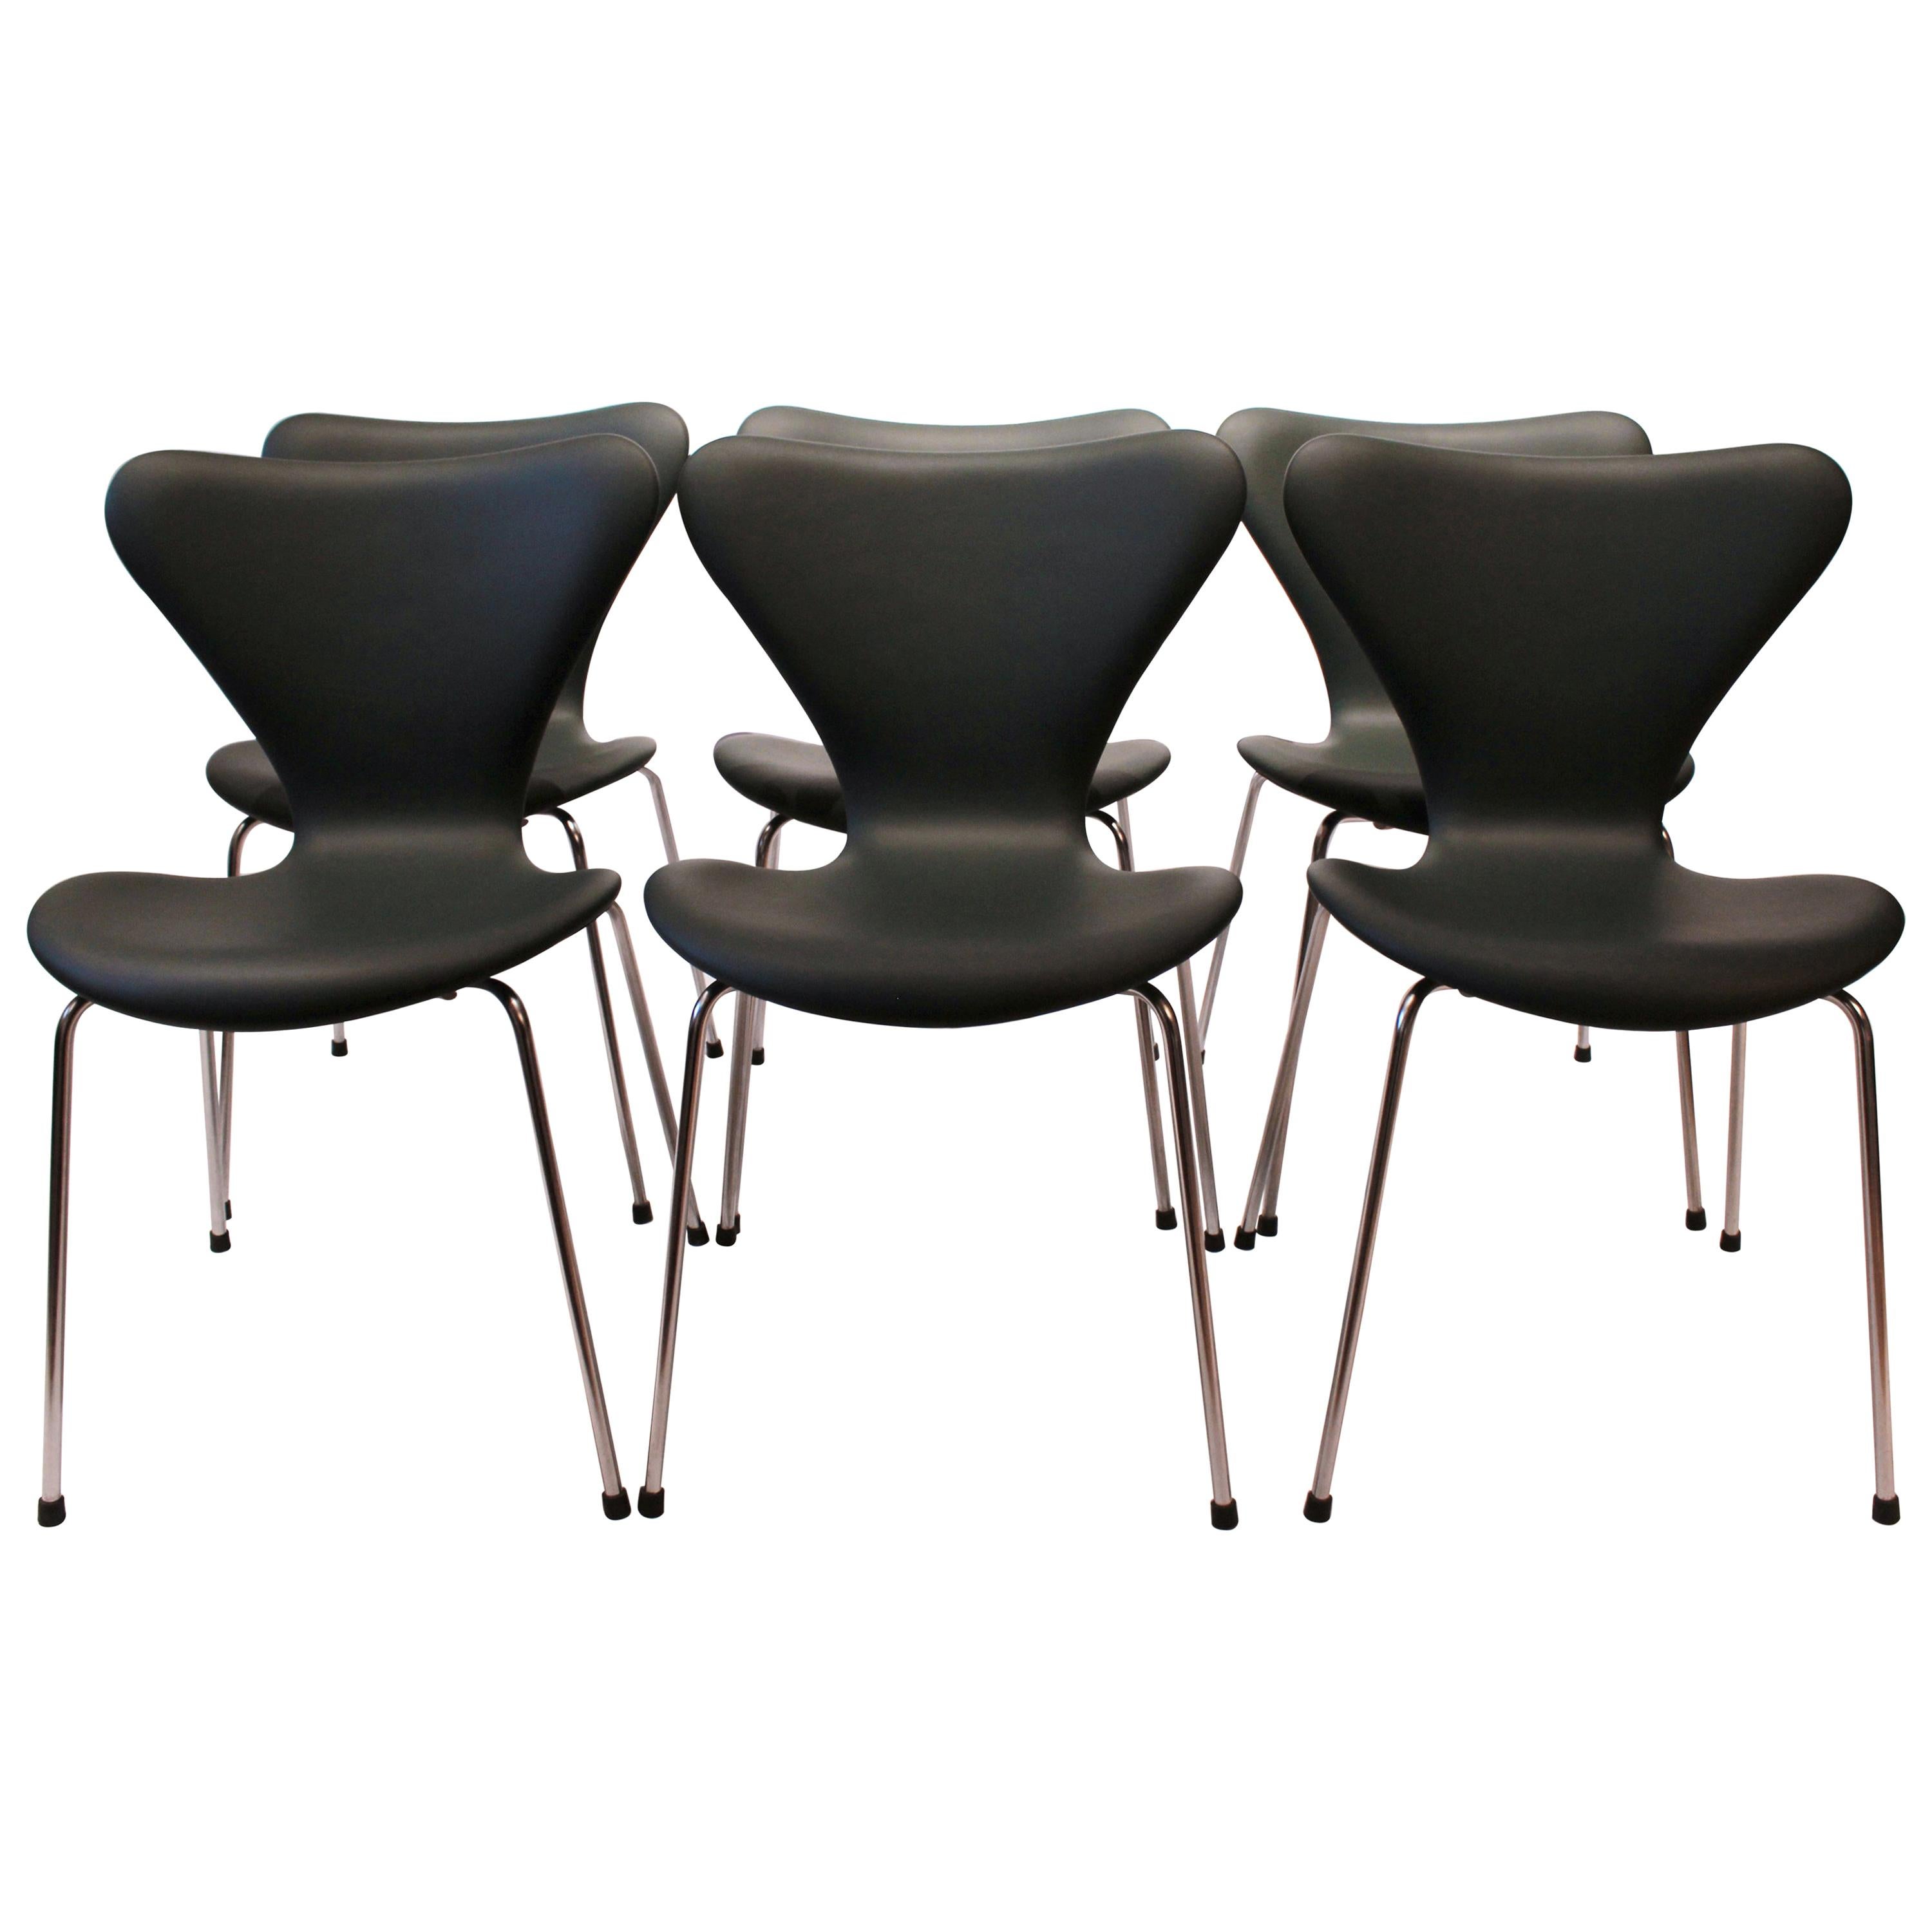 Set of 6 Seven Chairs, Model 3107, Black leather , by Arne Jacobsen